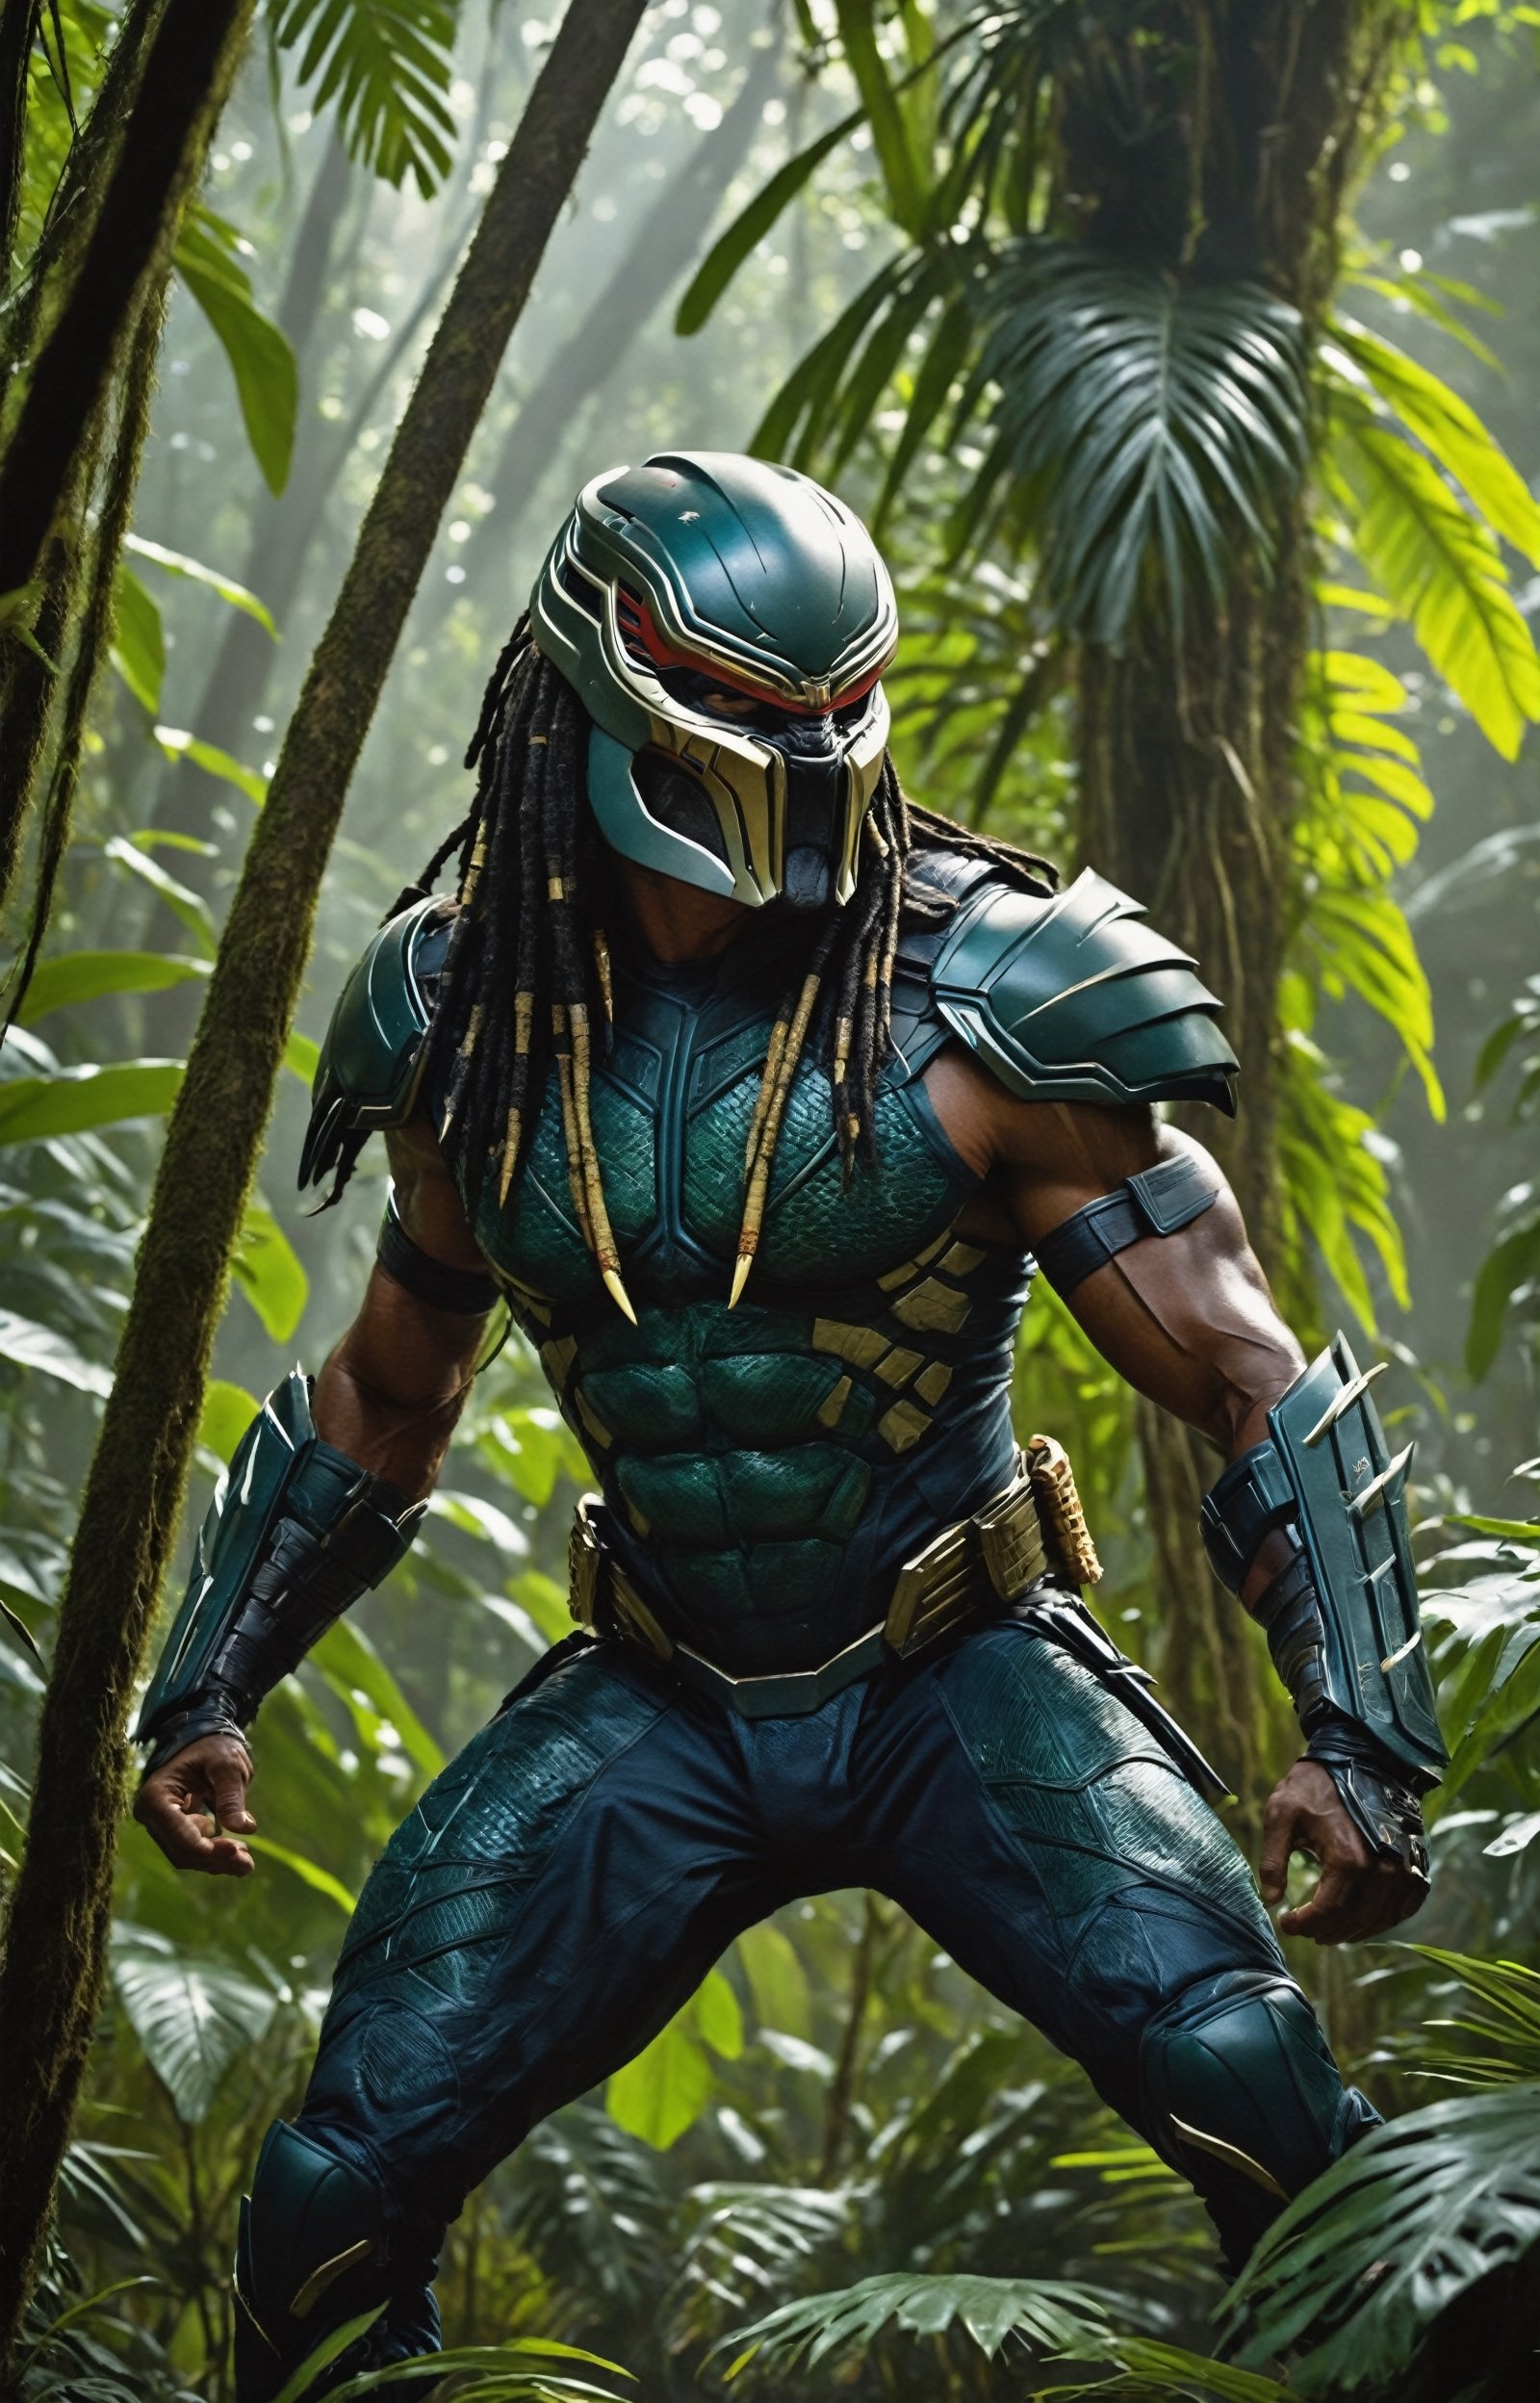 Amidst the dense, otherworldly foliage of a lush extraterrestrial jungle, the fearsome Yautja warrior, known as the Predator, emerges as the apex hunter in a riveting cinematic scene. Towering over the alien landscape, the Predator's hulking, heavily armored physique is cloaked in a mesh of advanced technology and natural camouflage. Its iconic mandibles extend menacingly from its reptilian-like face, revealing the creature's predatory intent. The creature's skin, adorned with tribal scars and hints of shimmering luminescence, adds an air of mystique to its formidable presence. In one hand, the Predator firmly grips a sleek, otherworldly plasma caster, ready to unleash devastating energy at its prey. The jungle canopy above is disturbed by the displacement of air caused by the Predator's cloaked form, creating an eerie distortion of light and shadows. The extraterrestrial atmosphere is palpable as the hunter becomes one with the environment, embodying the perfect blend of stealth, advanced weaponry, and primal instinct that defines this iconic cinematic character.,LegendDarkFantasy